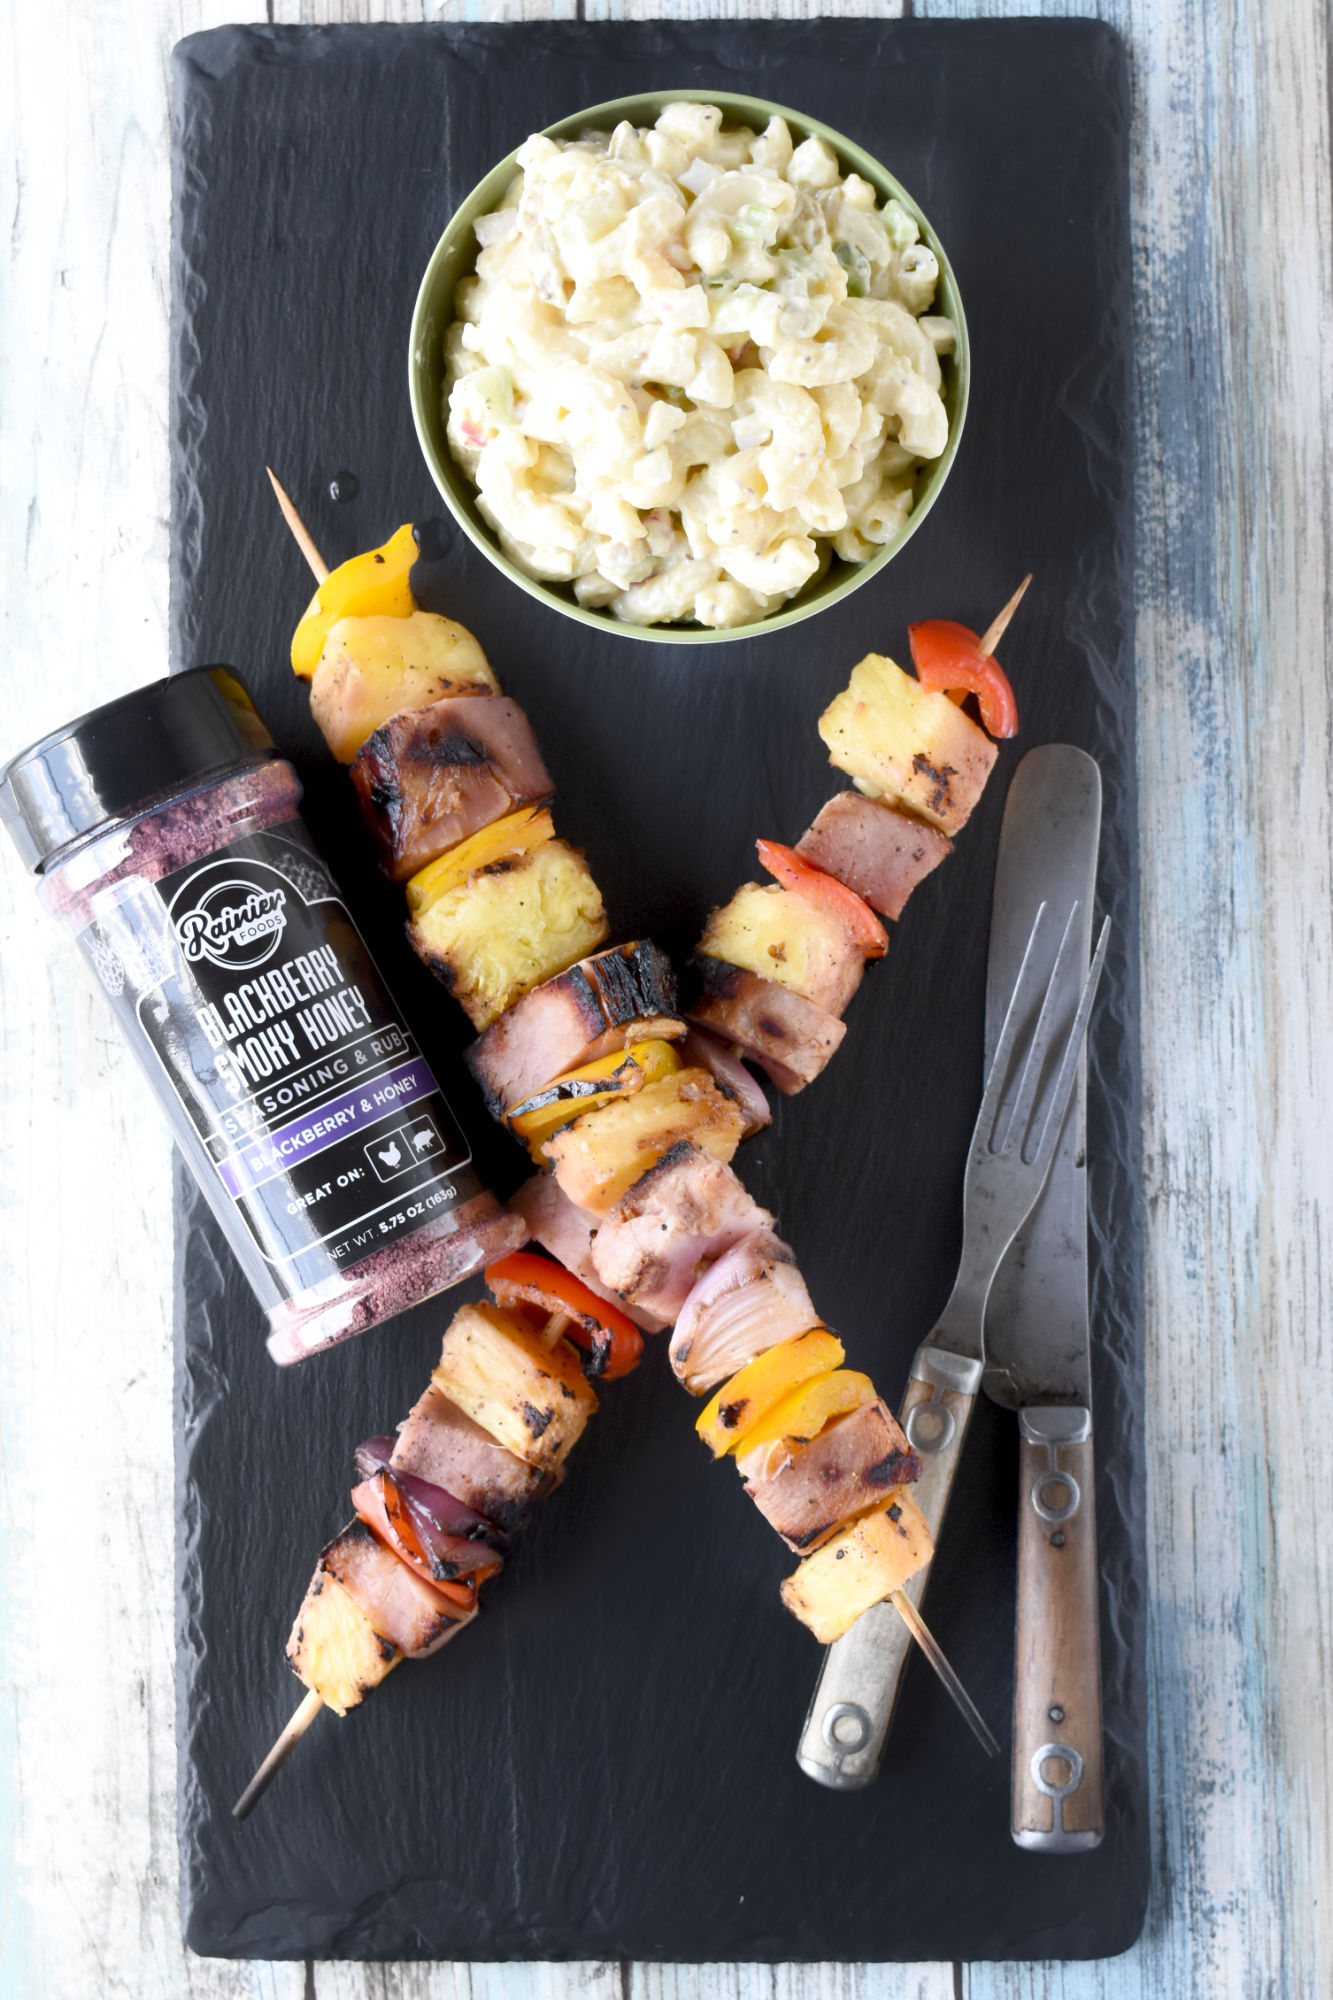 You can make Spicy Hawaiian Ham Kabobs with leftover ham, fresh pineapple, and some veggies.  Sprinkle some Blackberry Smoky Honey seasoning for a sweet and spicy kick that makes these kabobs absolutely delicious. #BBQWeek